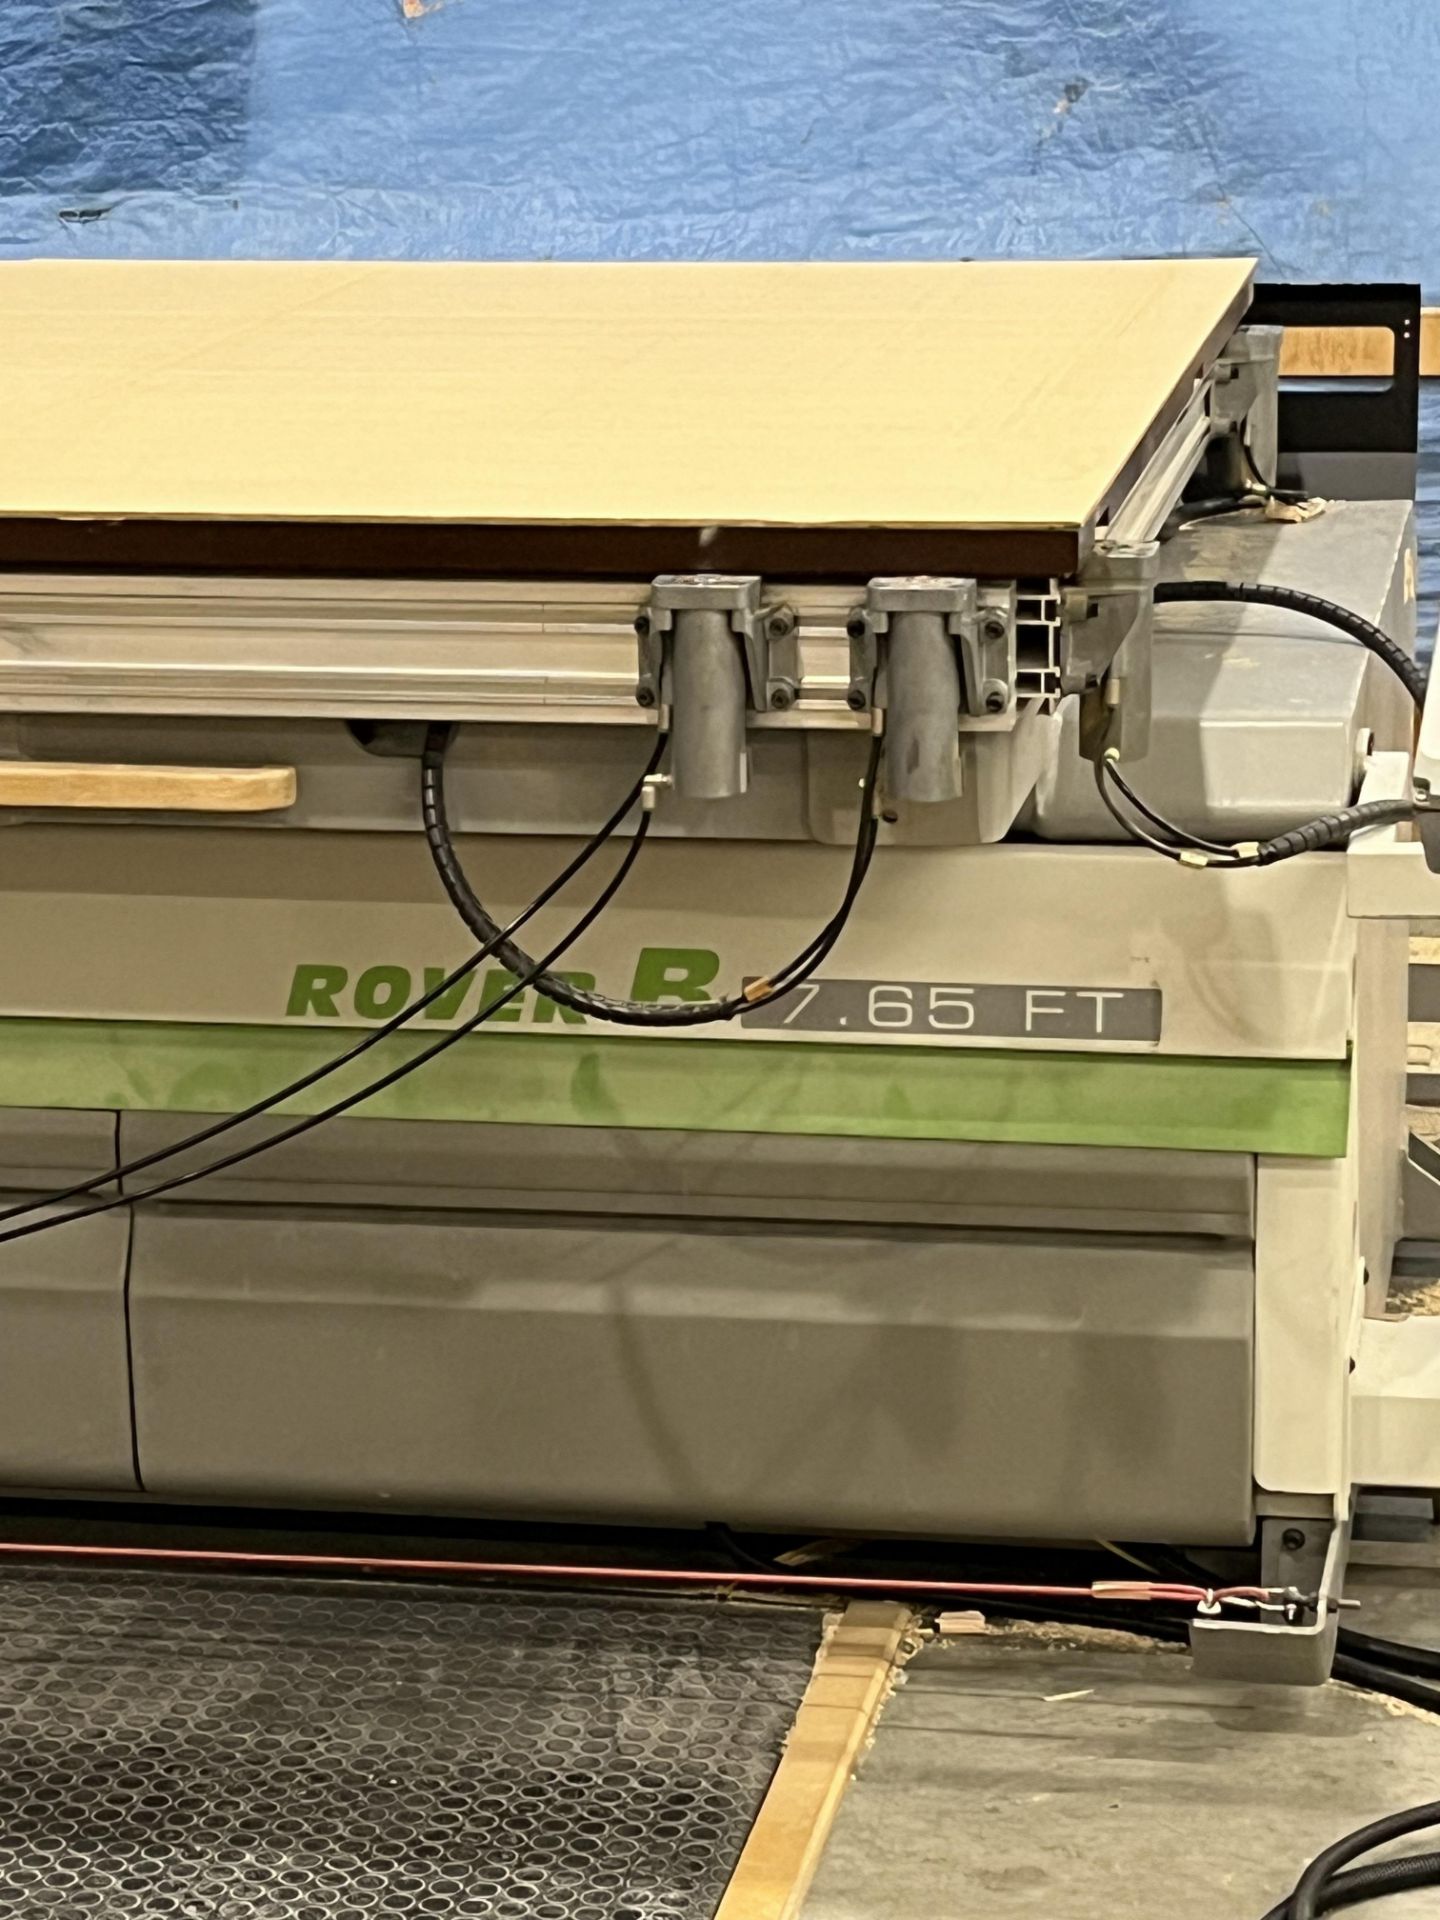 2006 BIESSE ROVER B 7.65 FT CNC ROUTER, 5' X 20' NESTED TABLE, S/N 65328, 600V, - Image 2 of 10